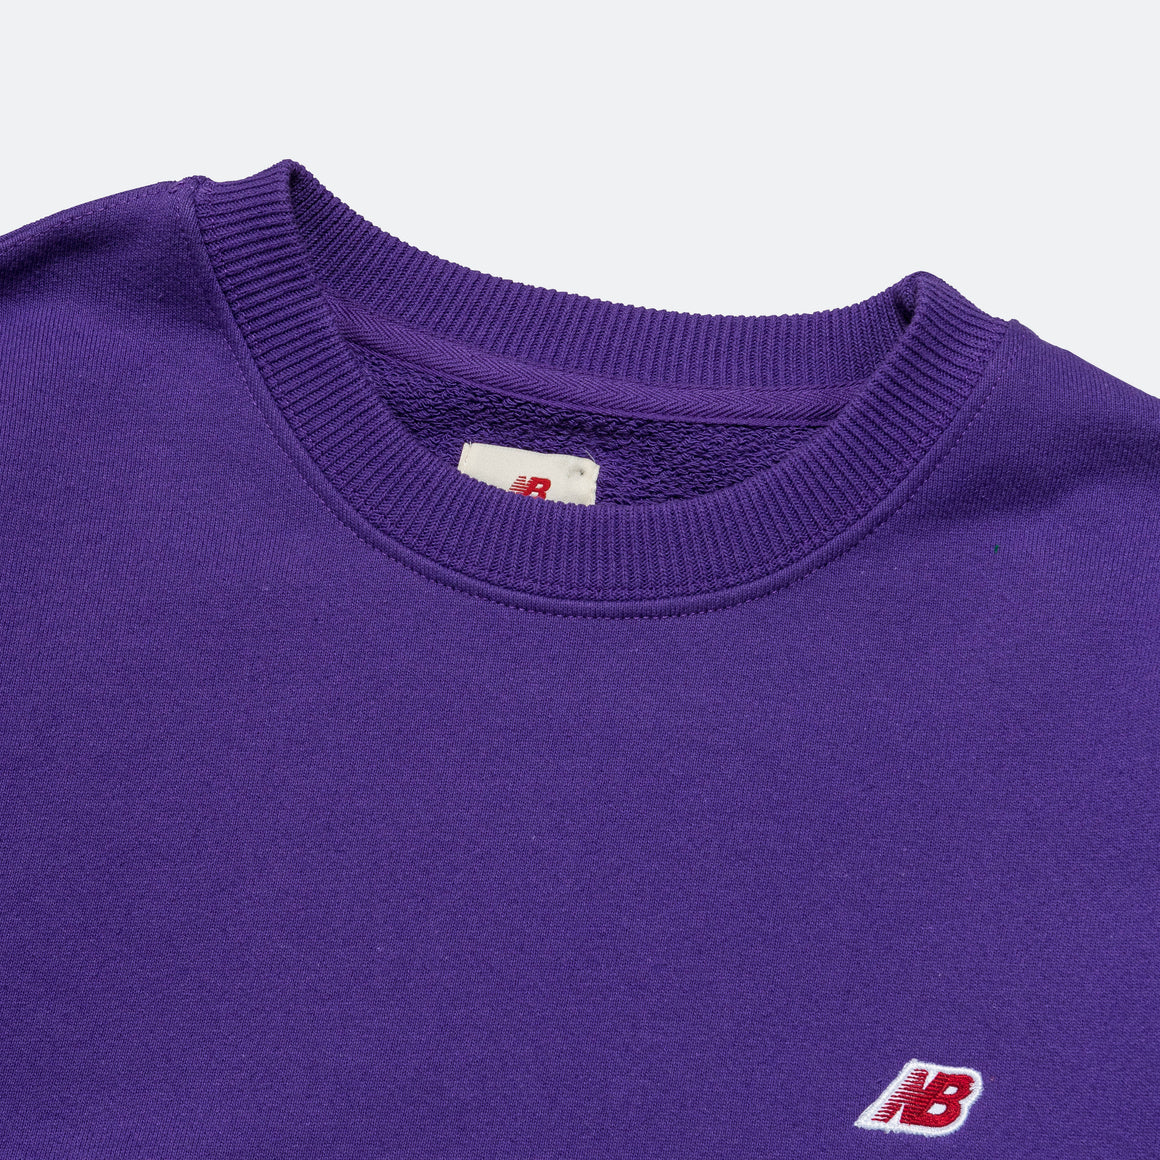 New Balance - MADE in USA Crew Sweat - Prism Purple - UP THERE